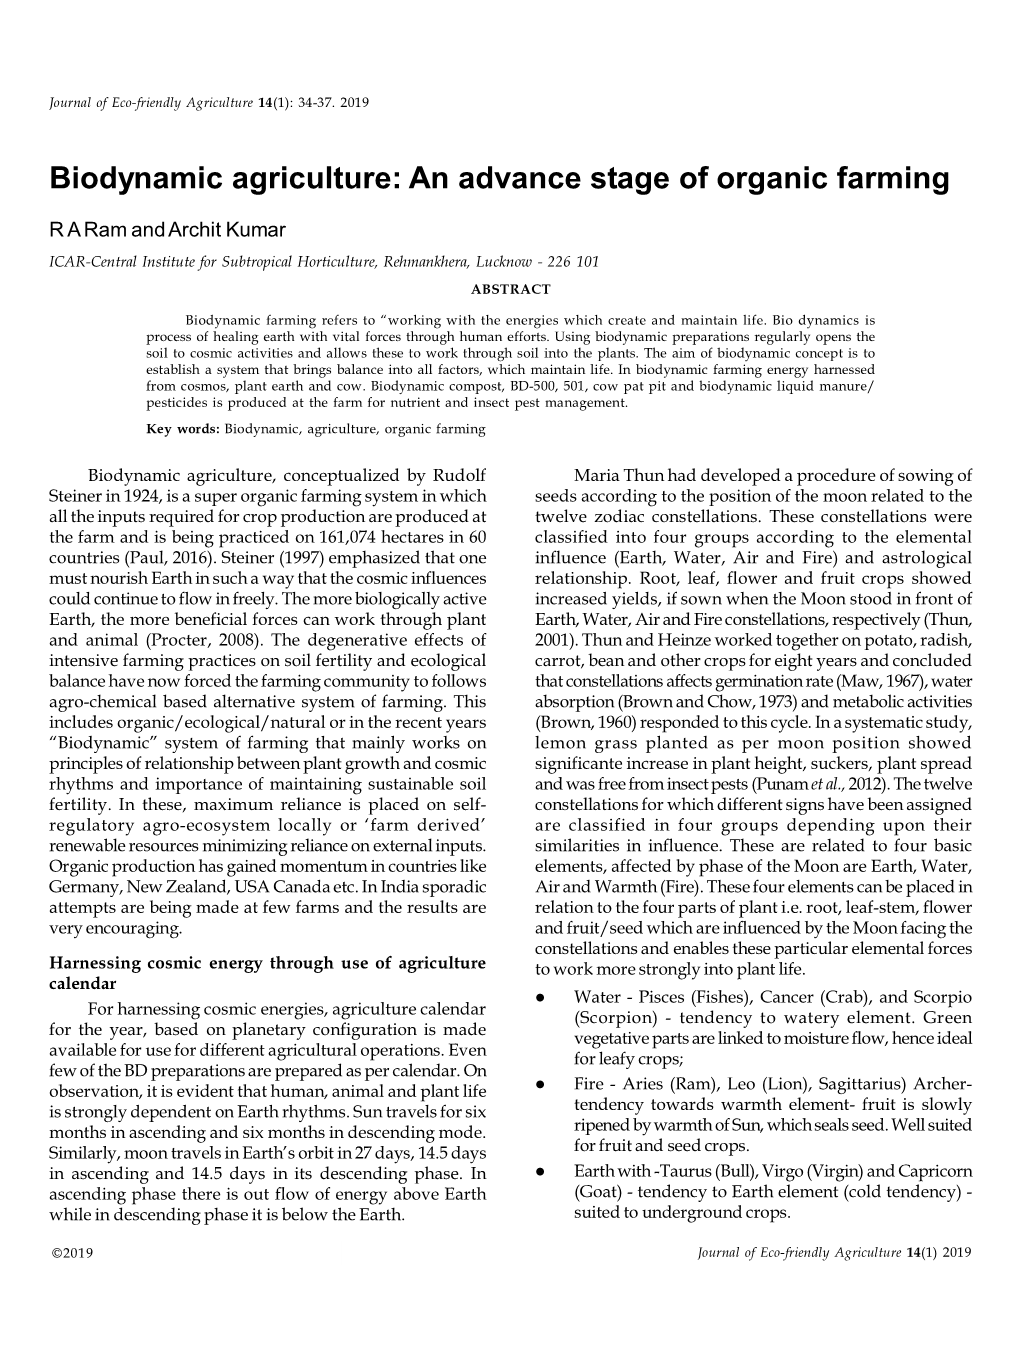 Biodynamic Agriculture: an Advance Stage of Organic Farming